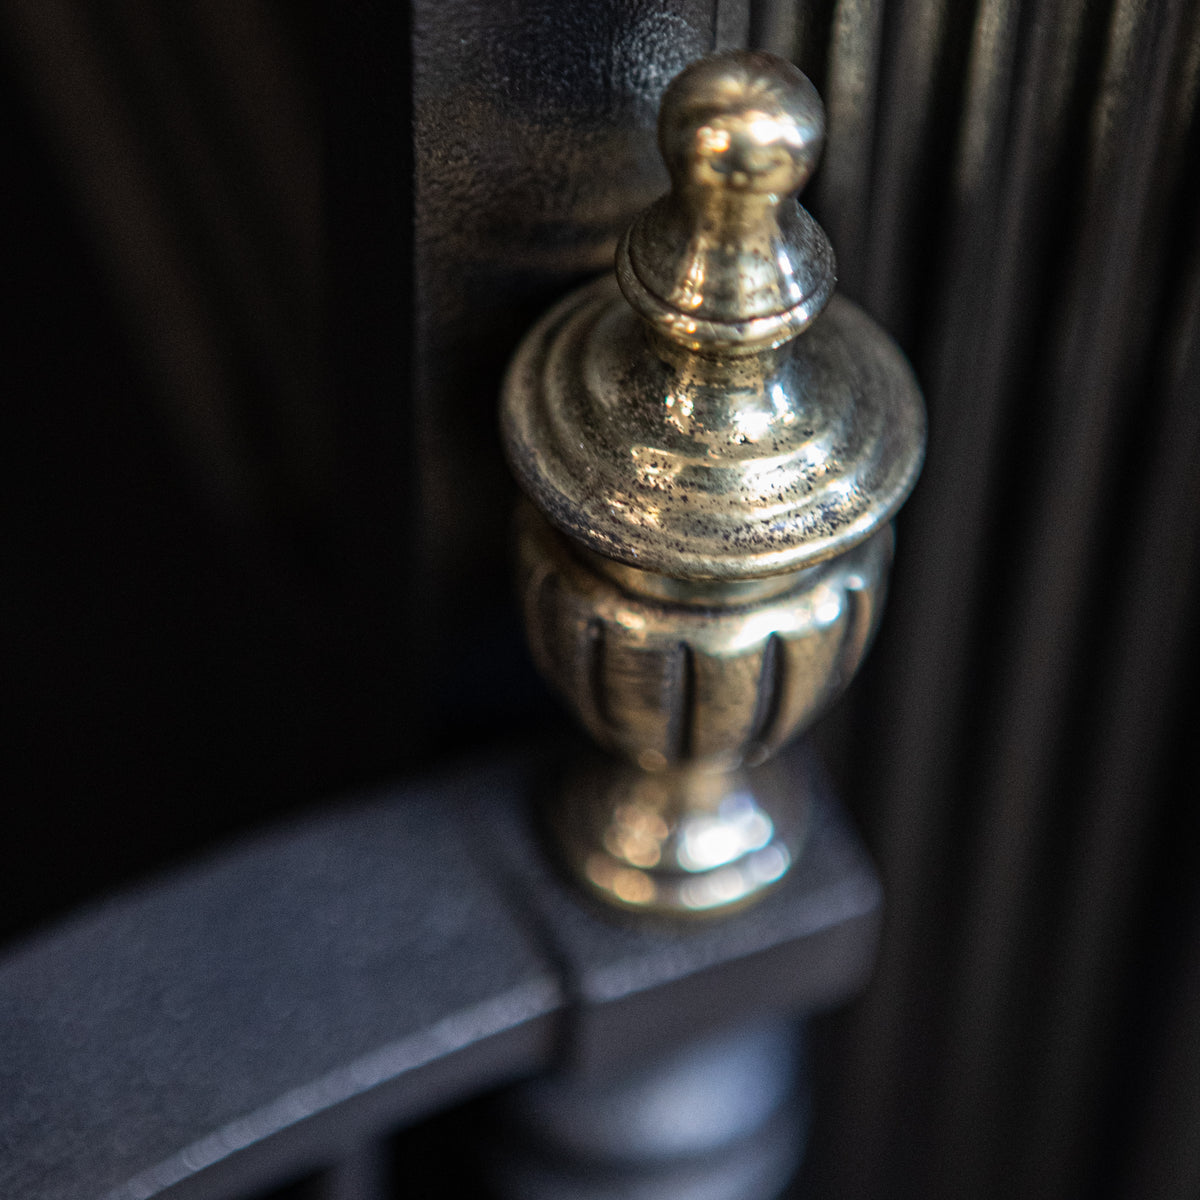 Antique Cast Iron Register Grate with Brass Finials | The Architectural Forum